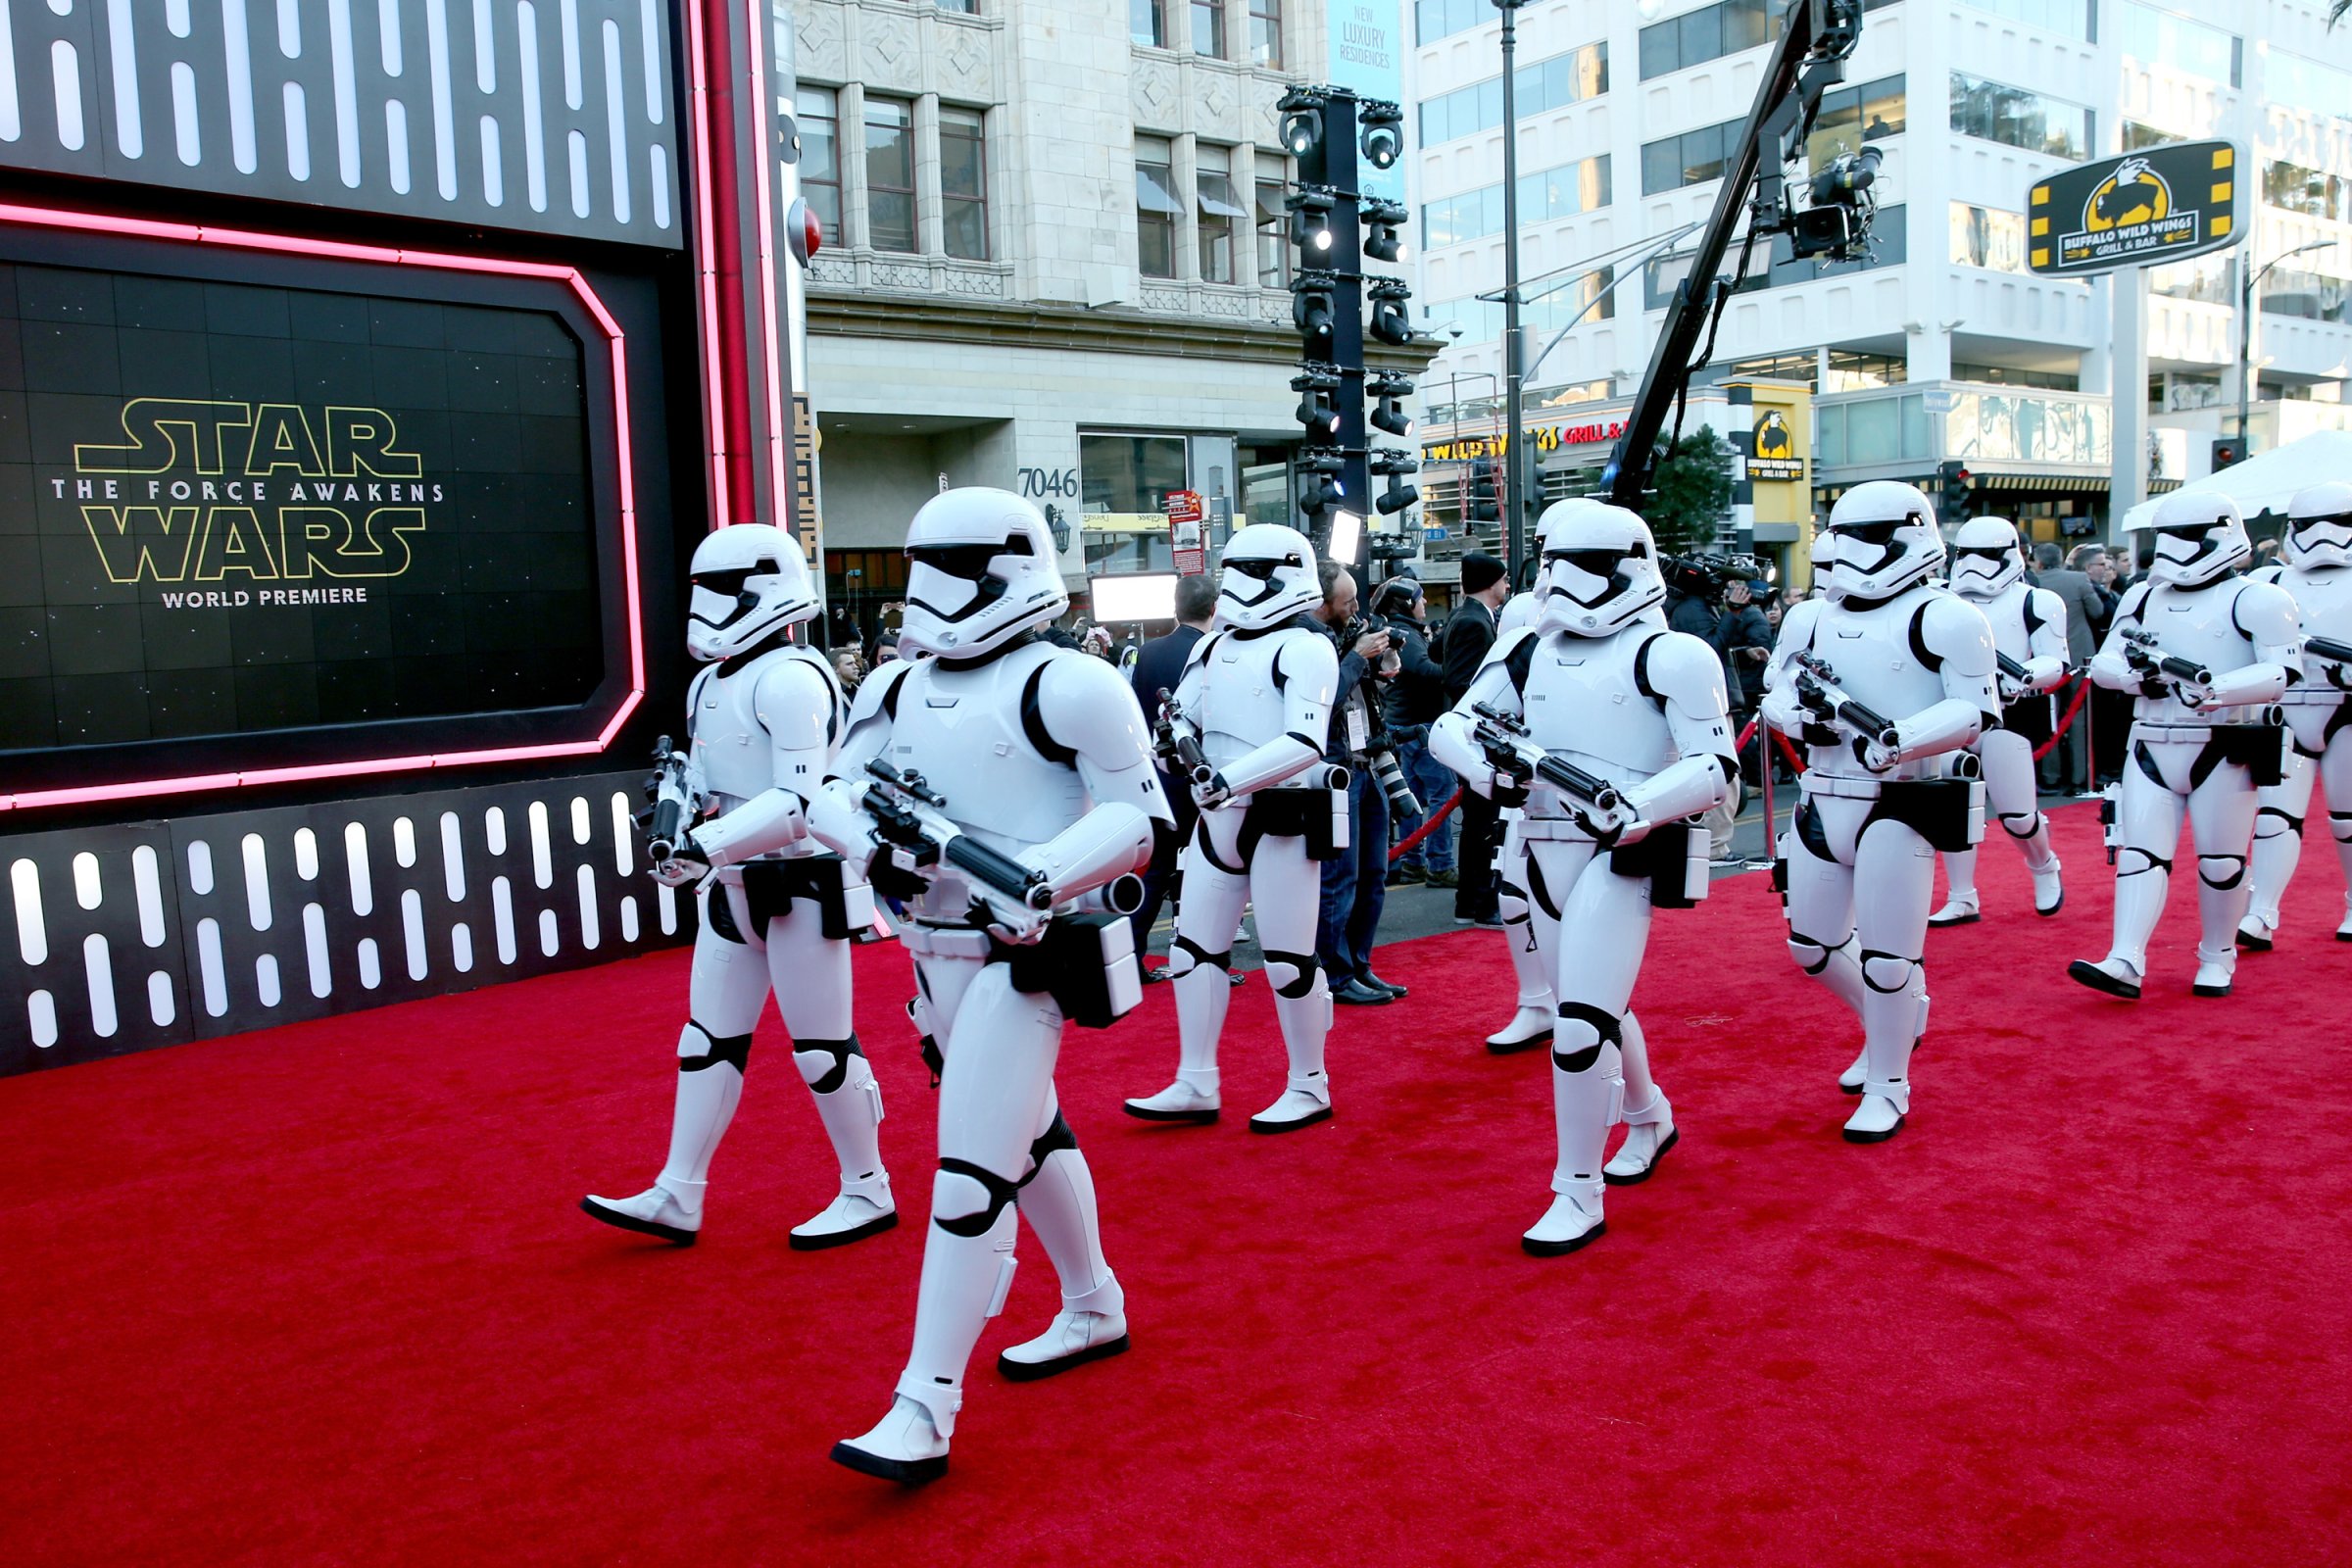 Stormtroopers walk on the red carpet at the world premiere of Star Wars: The Force Awakens at the Dolby, El Capitan, and TCL Theatres on Dec. 14, 2015 in Hollywood, California.